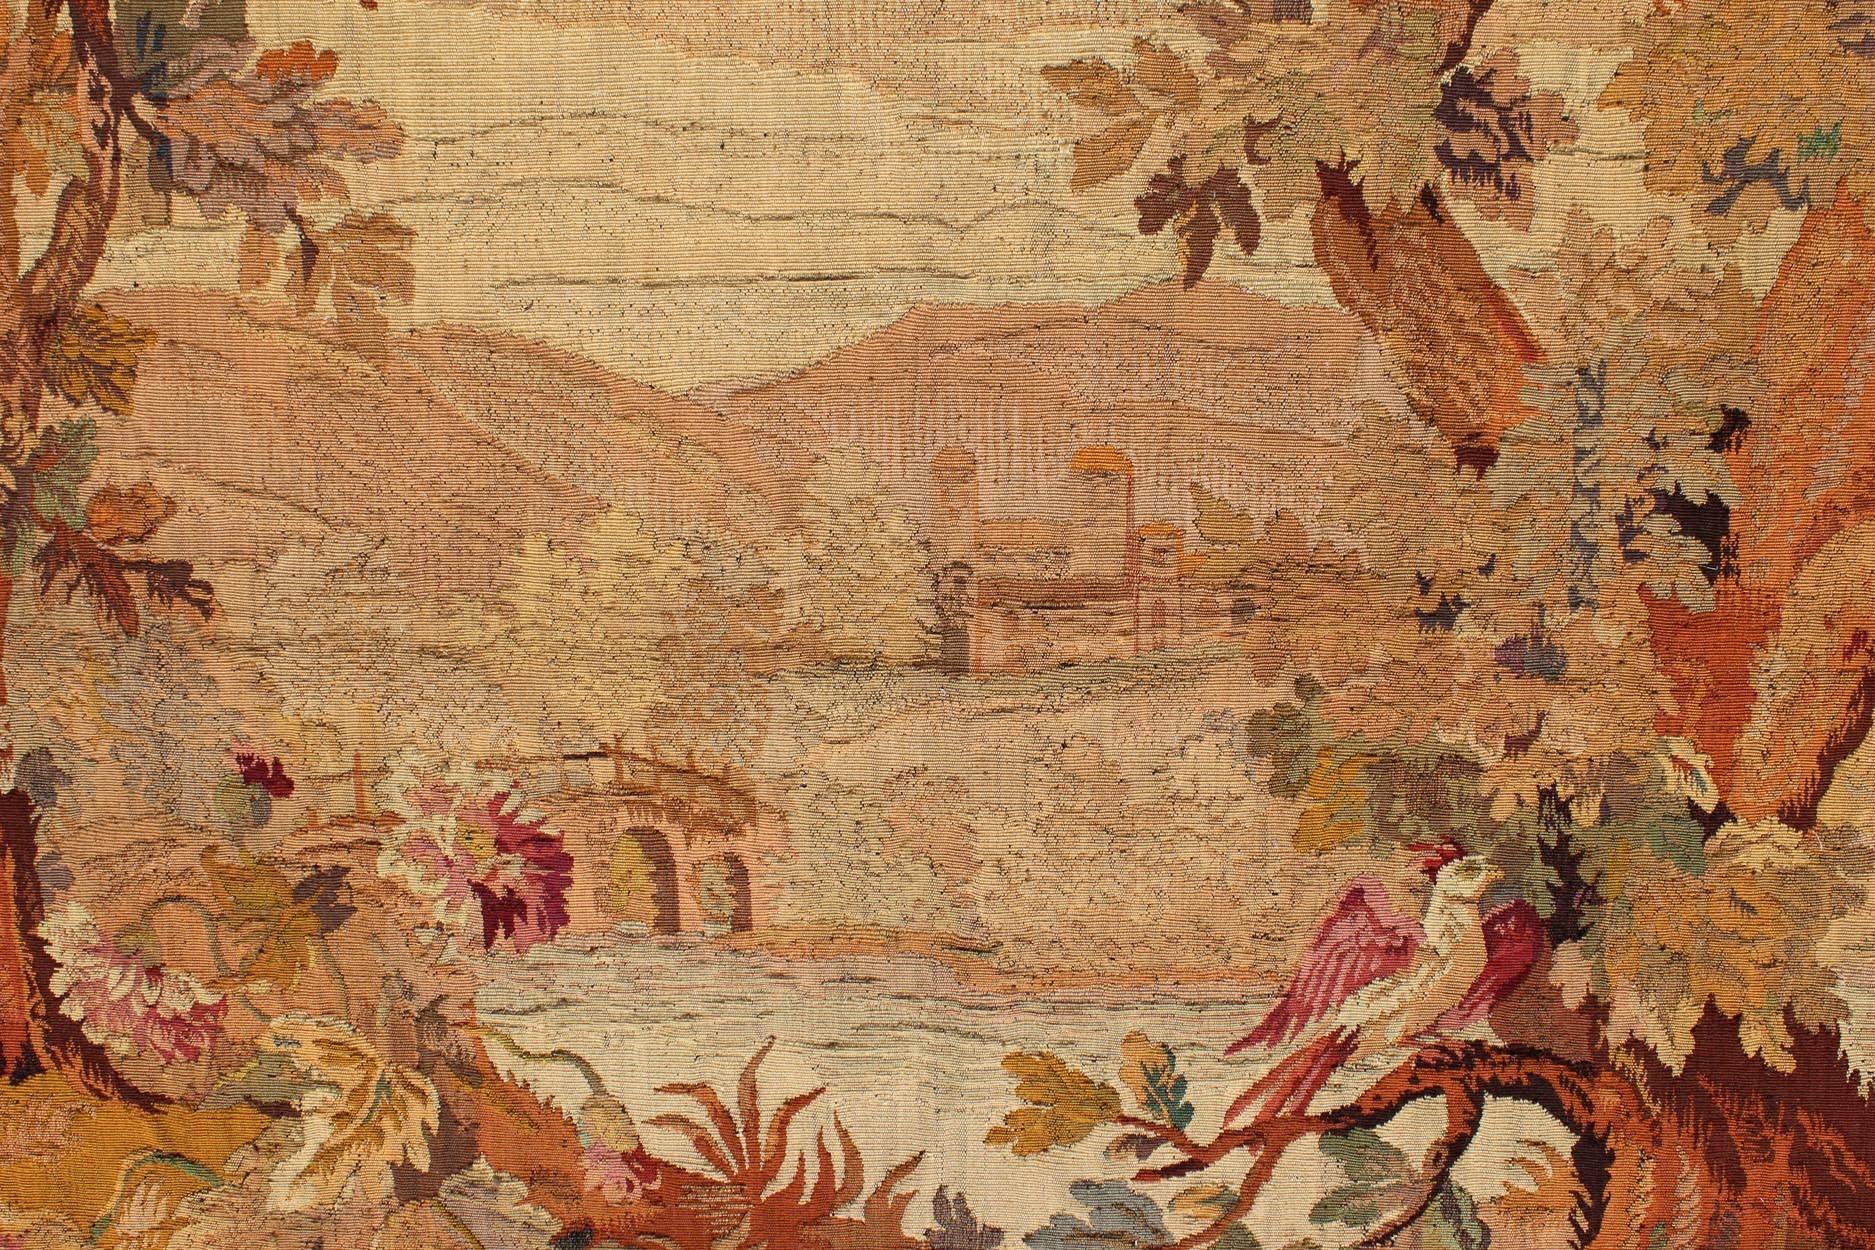 Antique French Landscape Tapestry Overlooking a River/Pond, Bridge in Autumnal Colors and Floral Border. Antique French Tapestry Two Trees Overlooking a River Bridge in Autumnal Colors, Keivan Woven Arts / rug;  N15-0503,  country of origin / type: